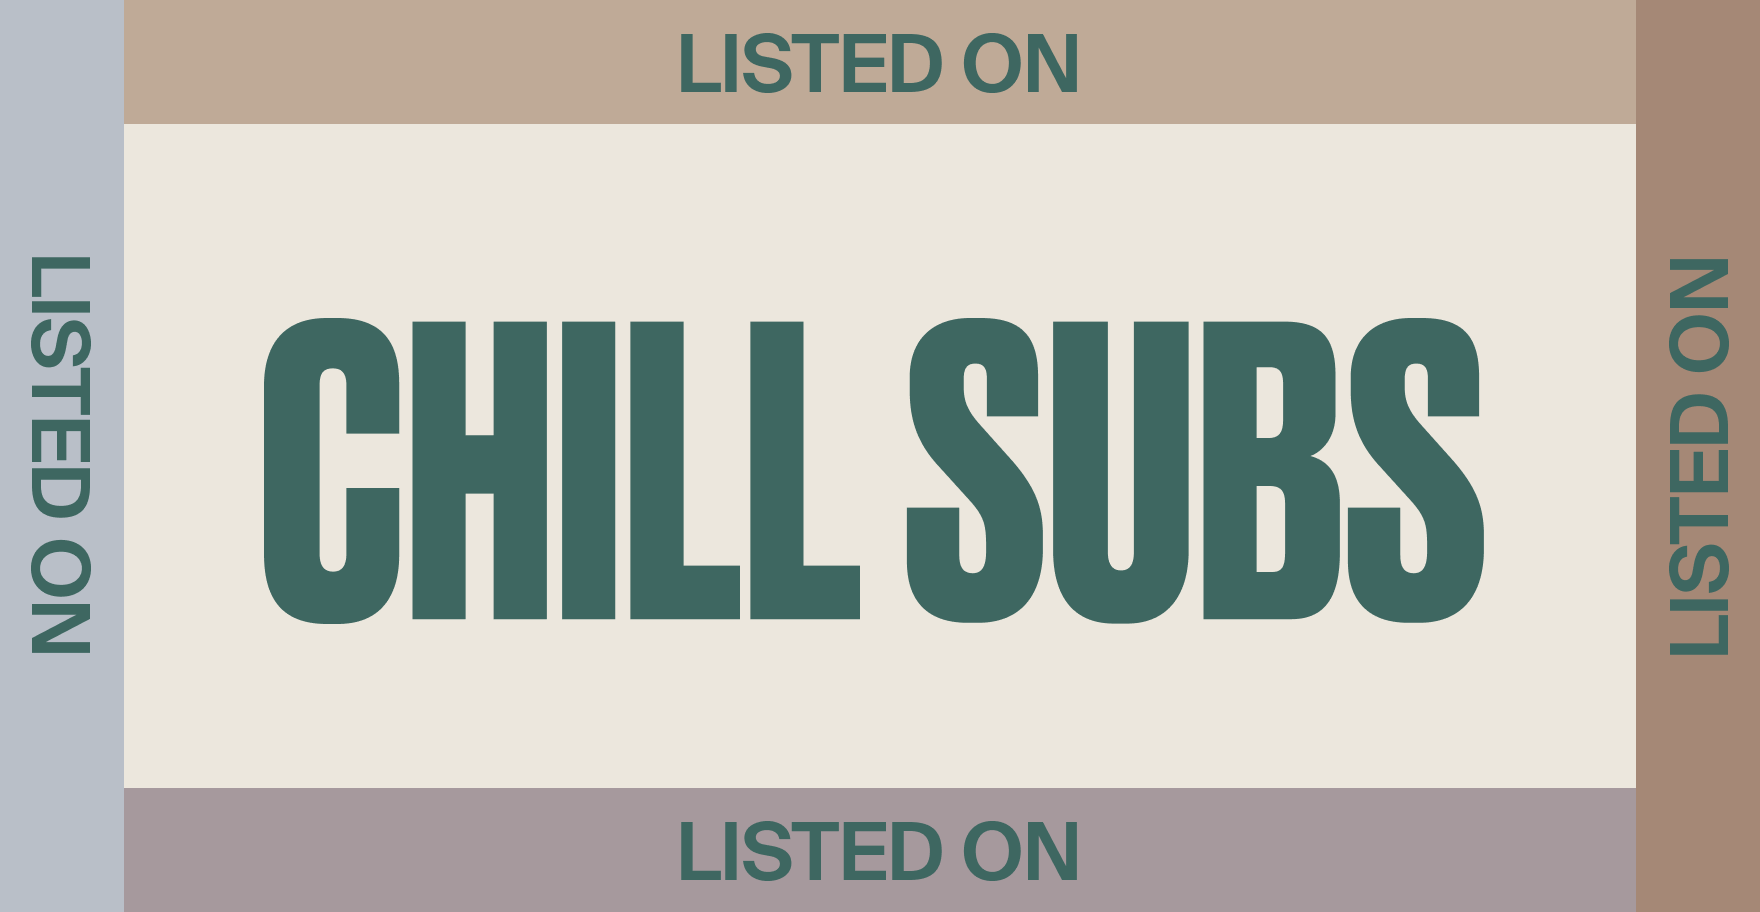 Sticker for literary magazines listed on Chill Subs. Has a Chill Subs logo on it surrounded by four colorful "listed on" labels.